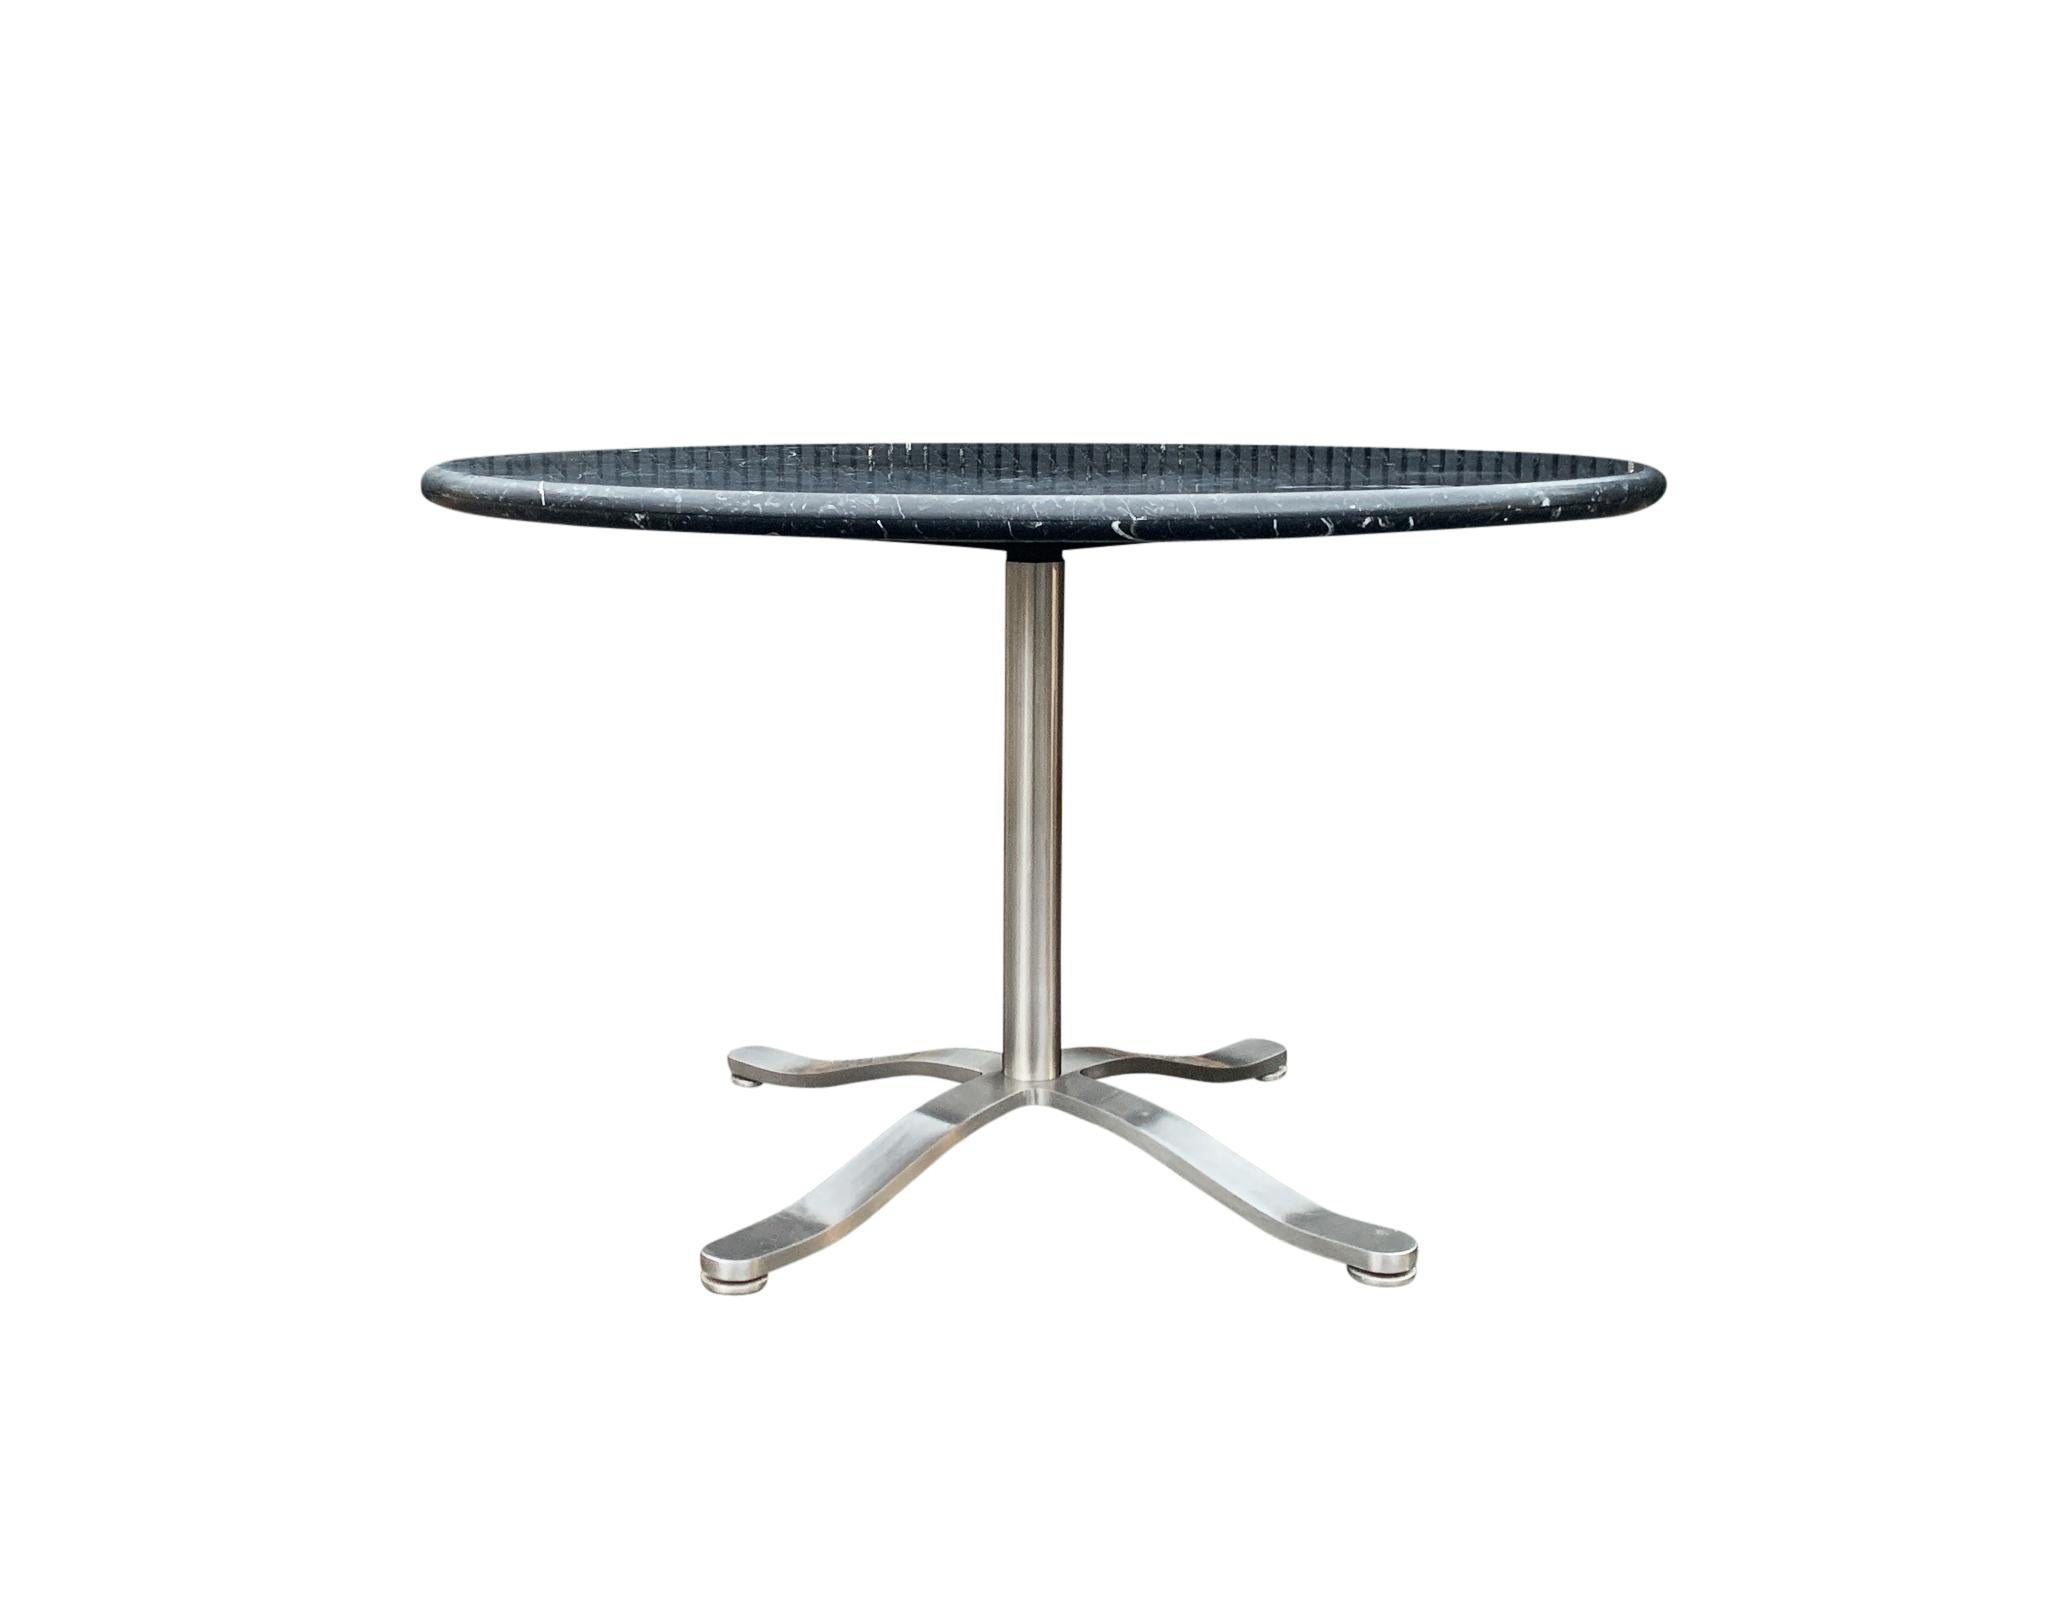 Superbly crafted with a Belgium black marble top, over 1